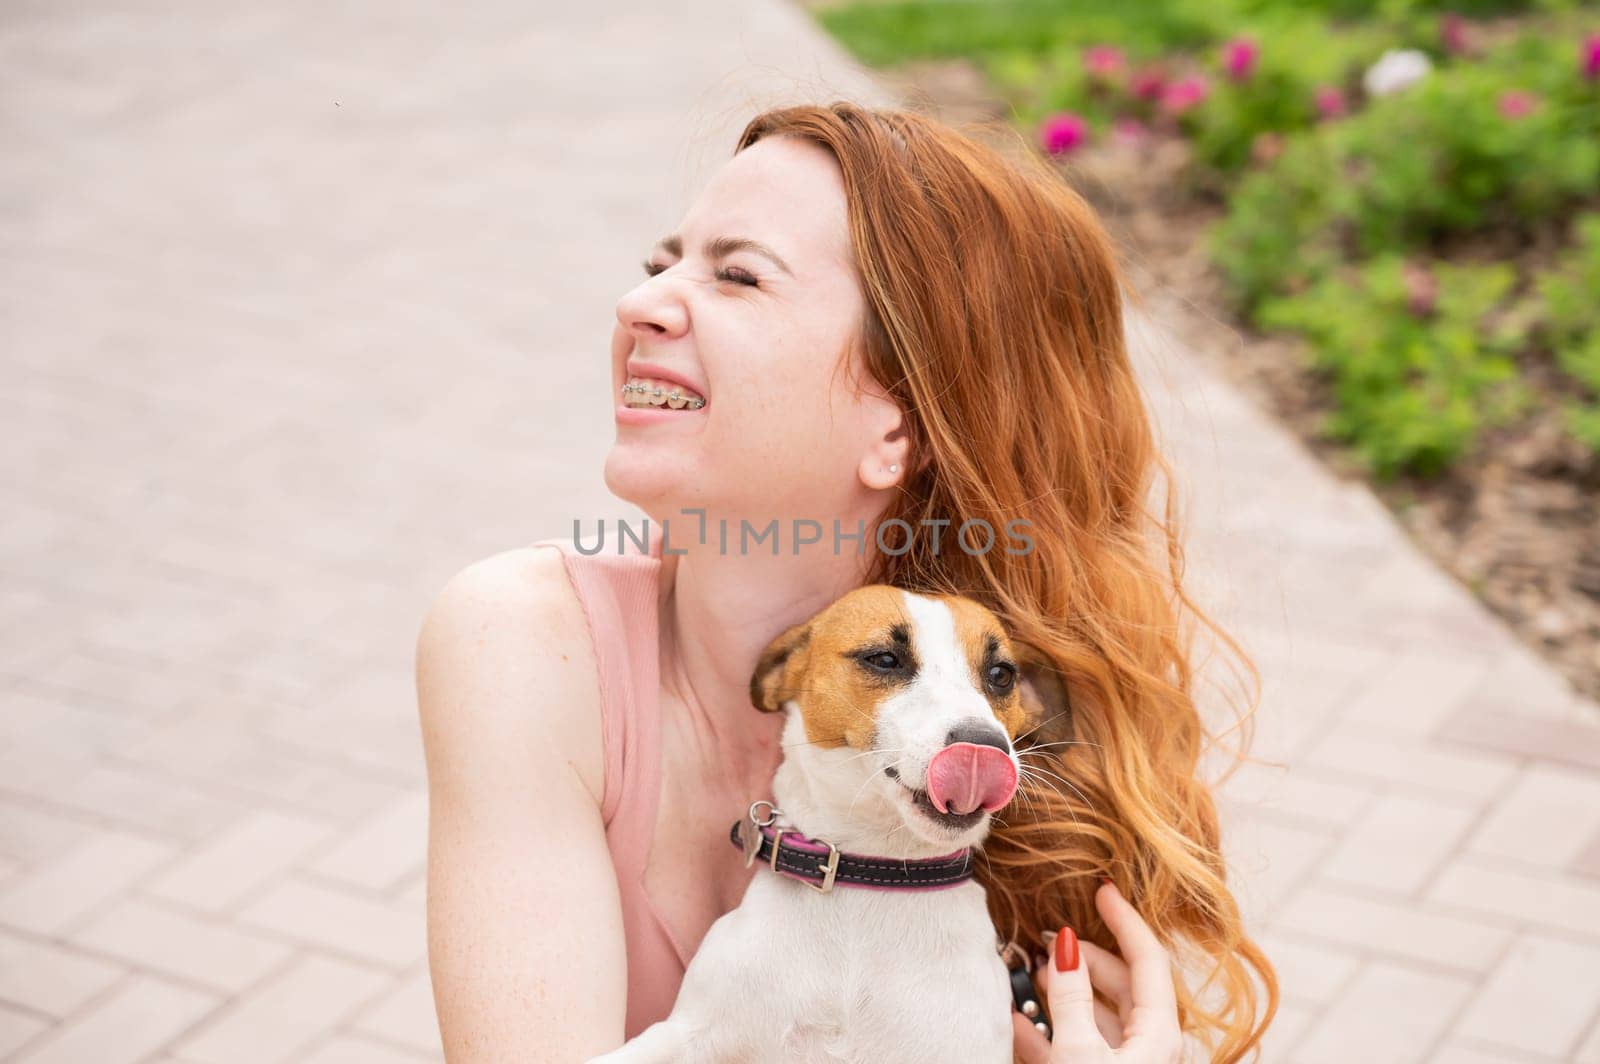 Dog jack russell terrier licks the owner in the face outdoors. Girl with braces on her teeth. by mrwed54